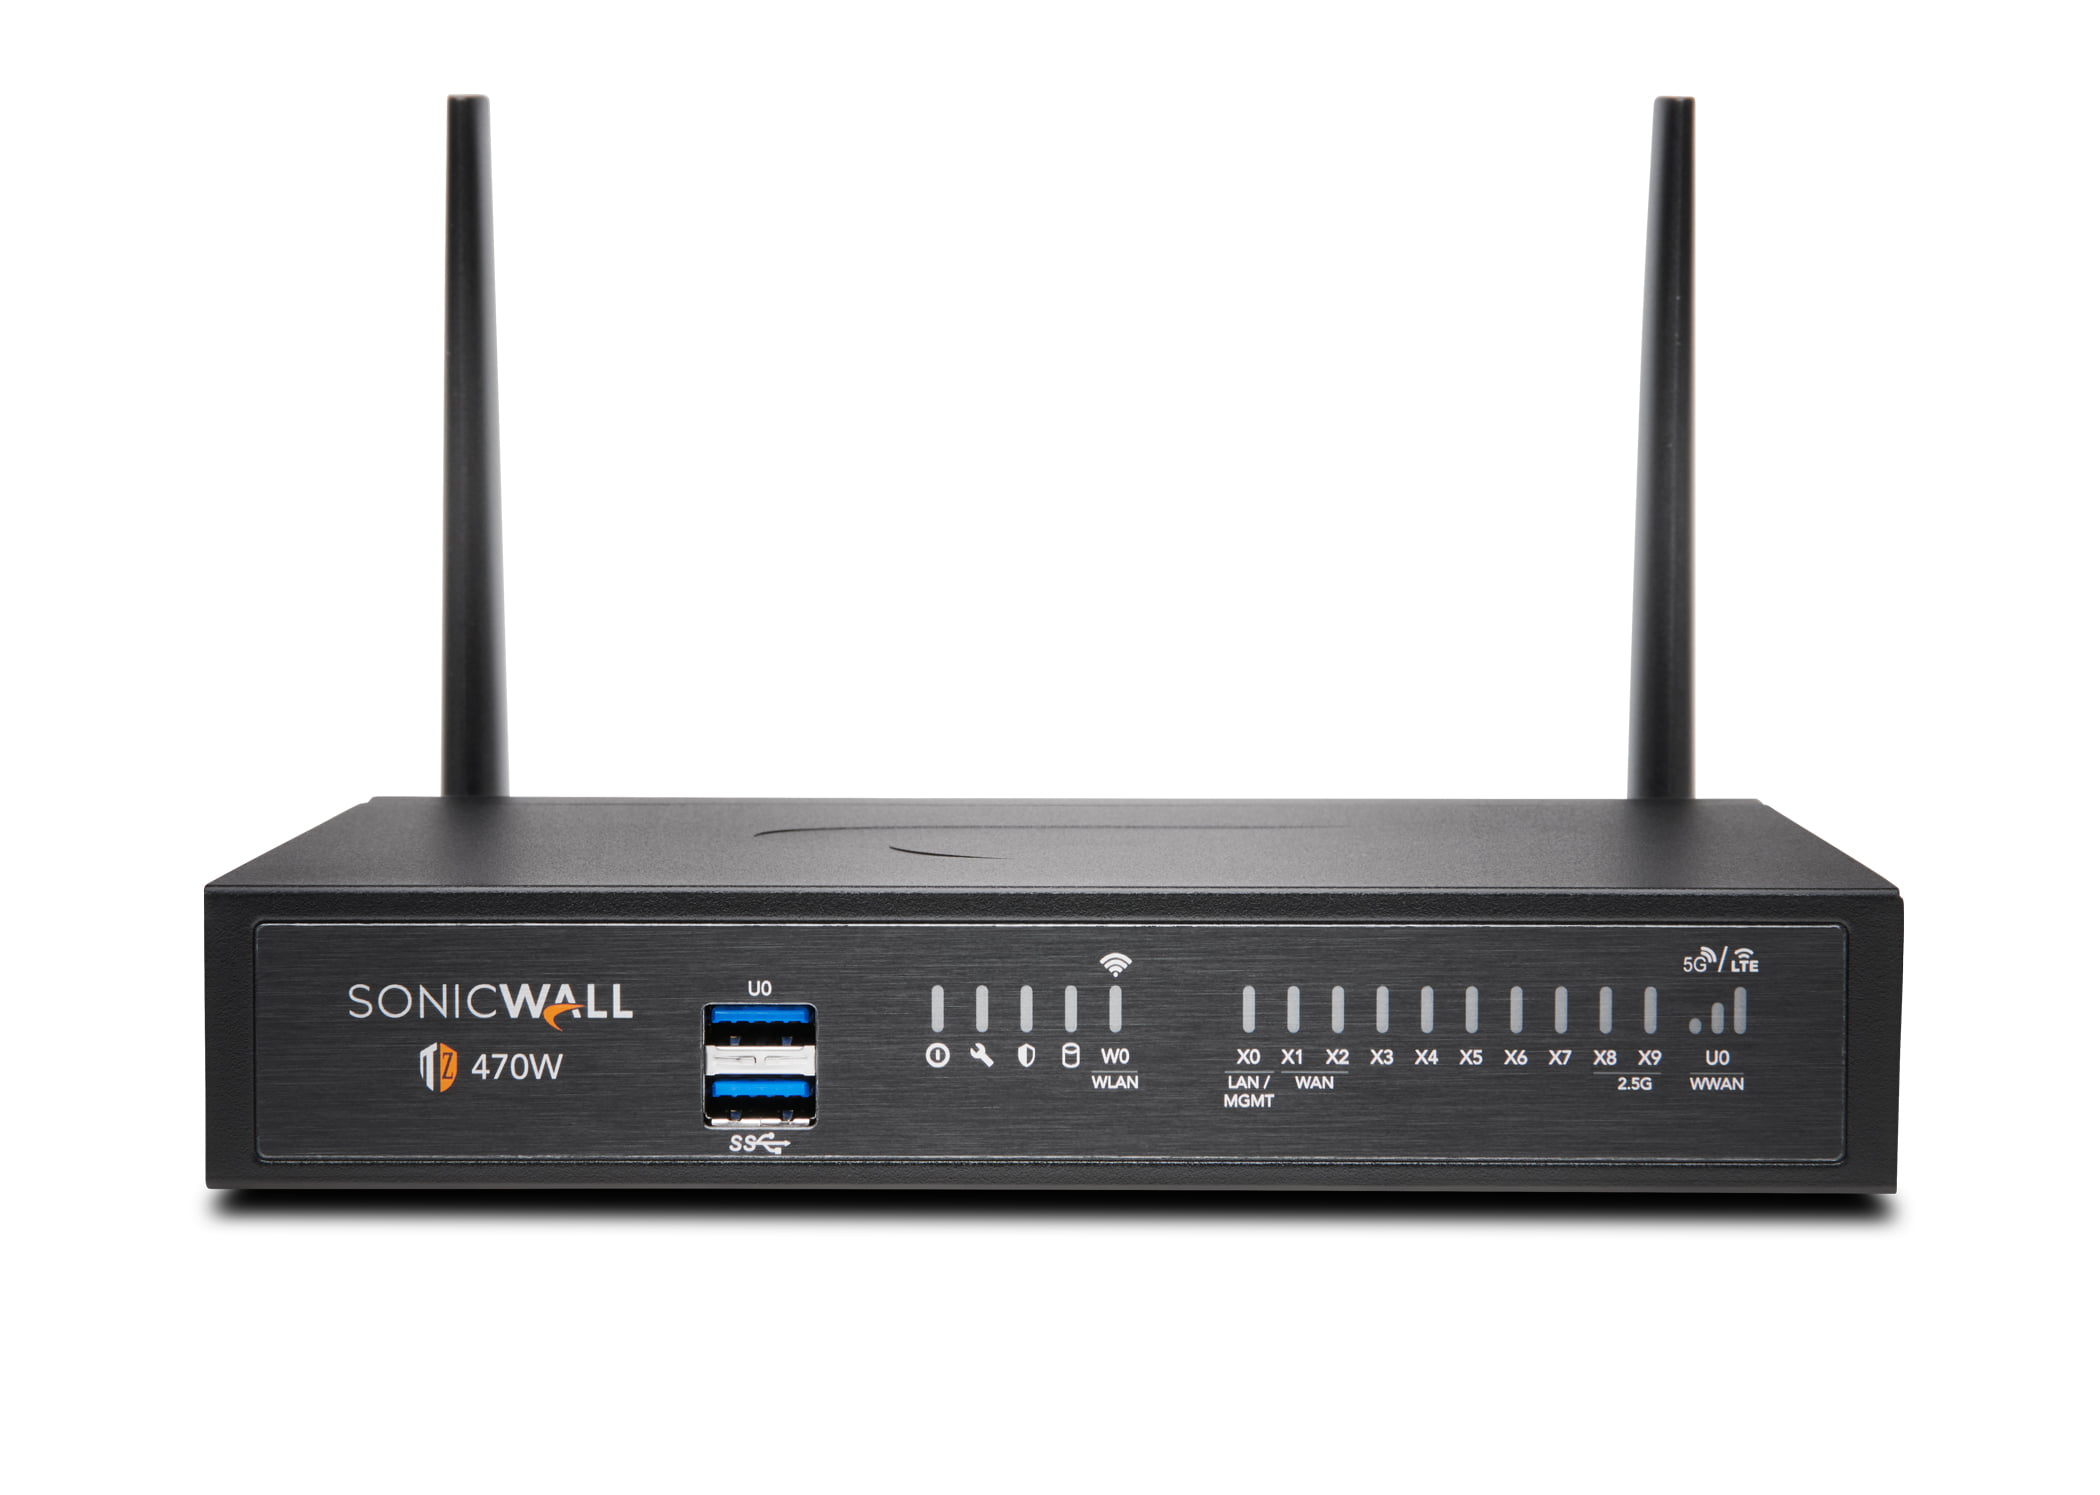 SONICWALL TZ470W + THREAT PROTECTION SERVICE SUITE (TPSS)